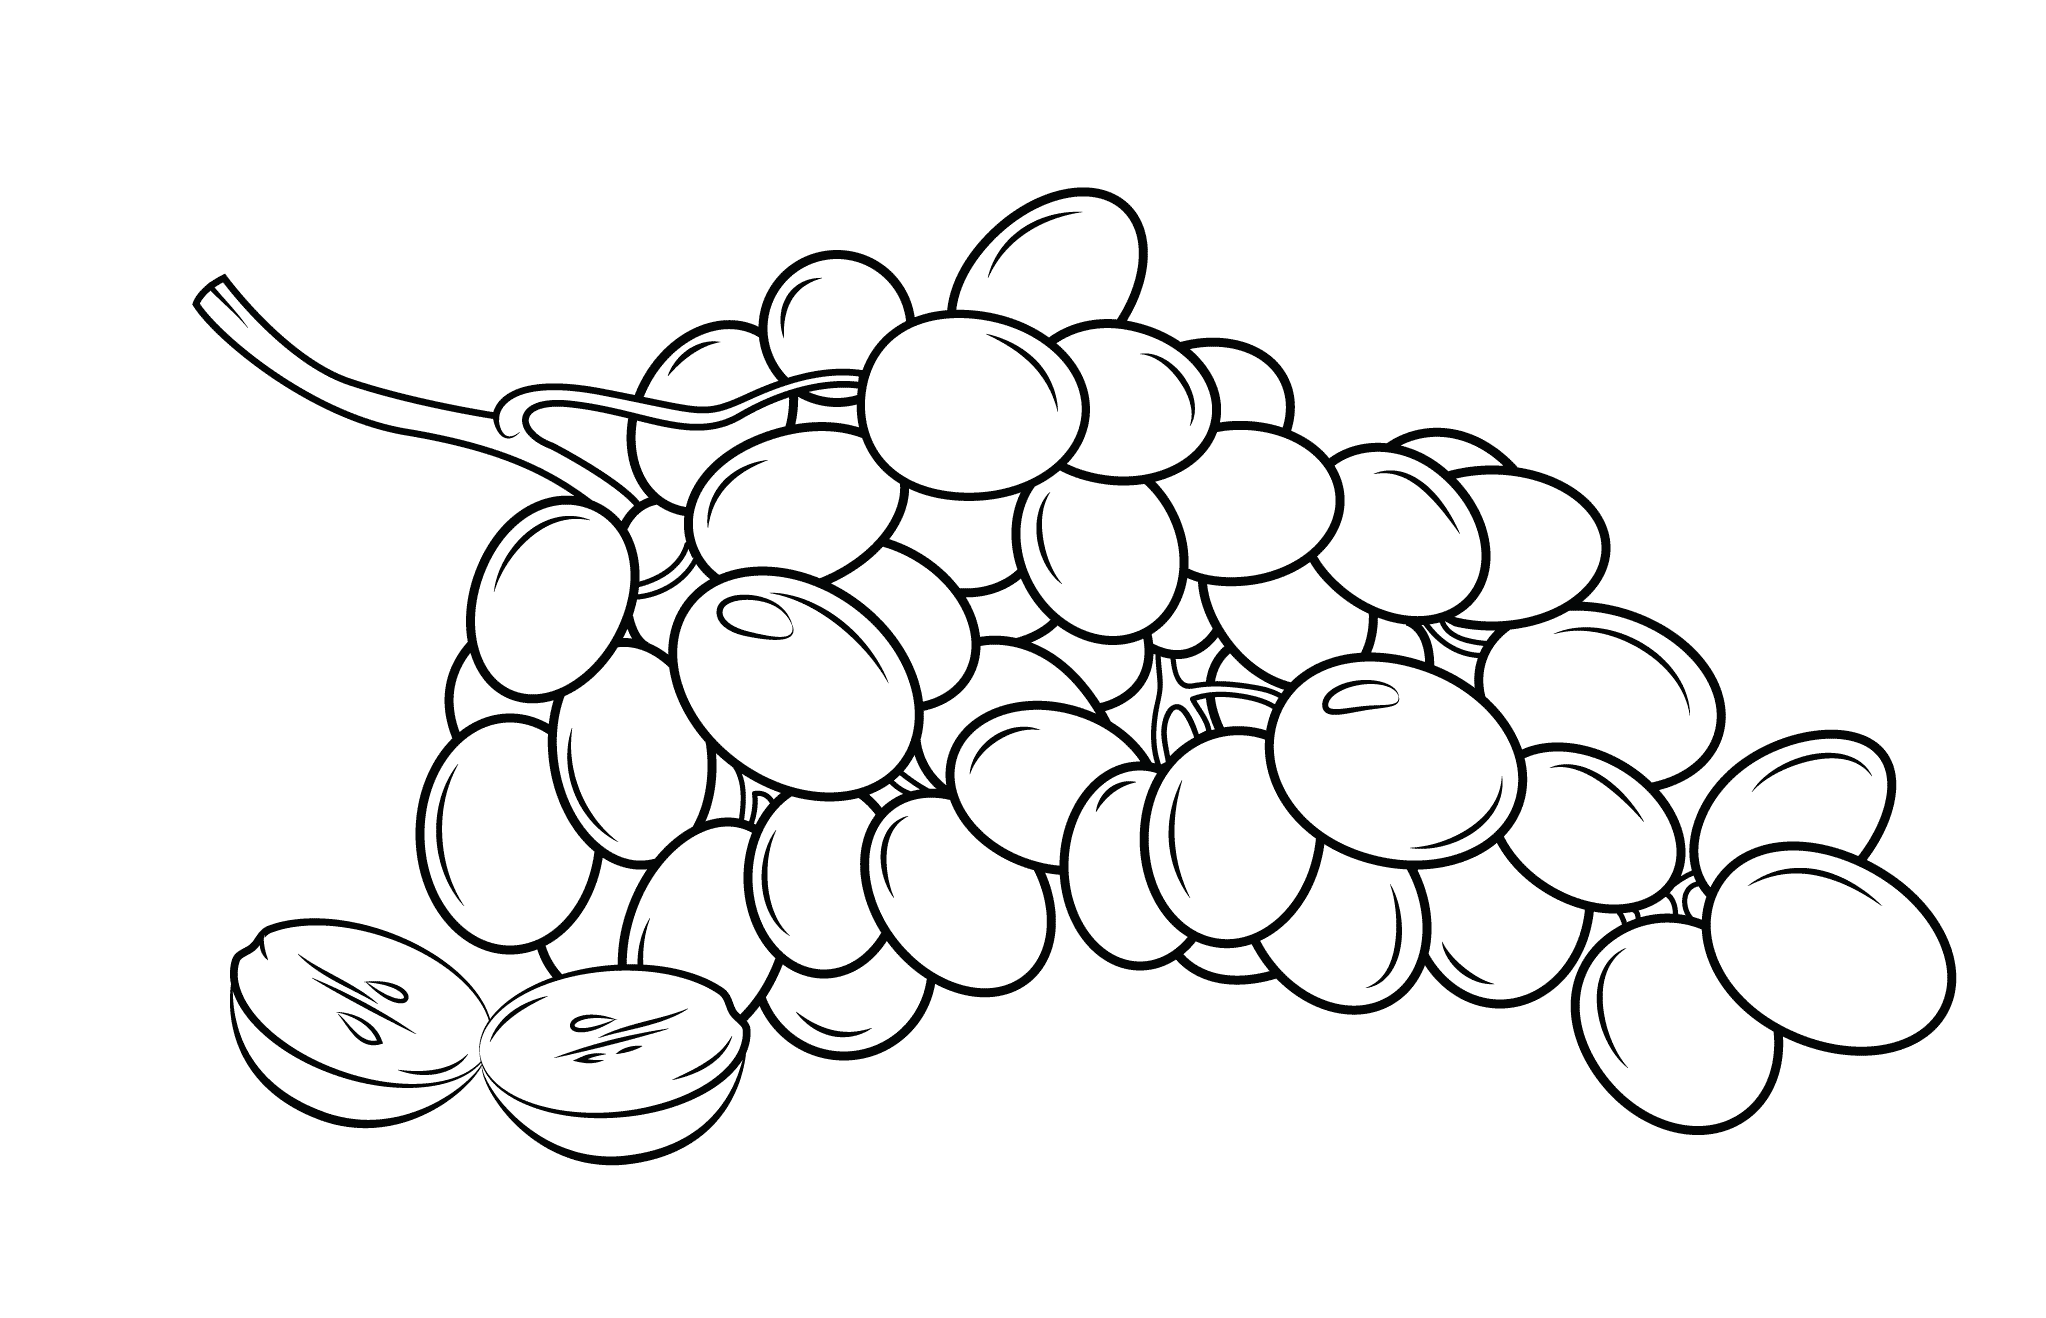 Download Grape Sheet For Preschool Coloring Pages